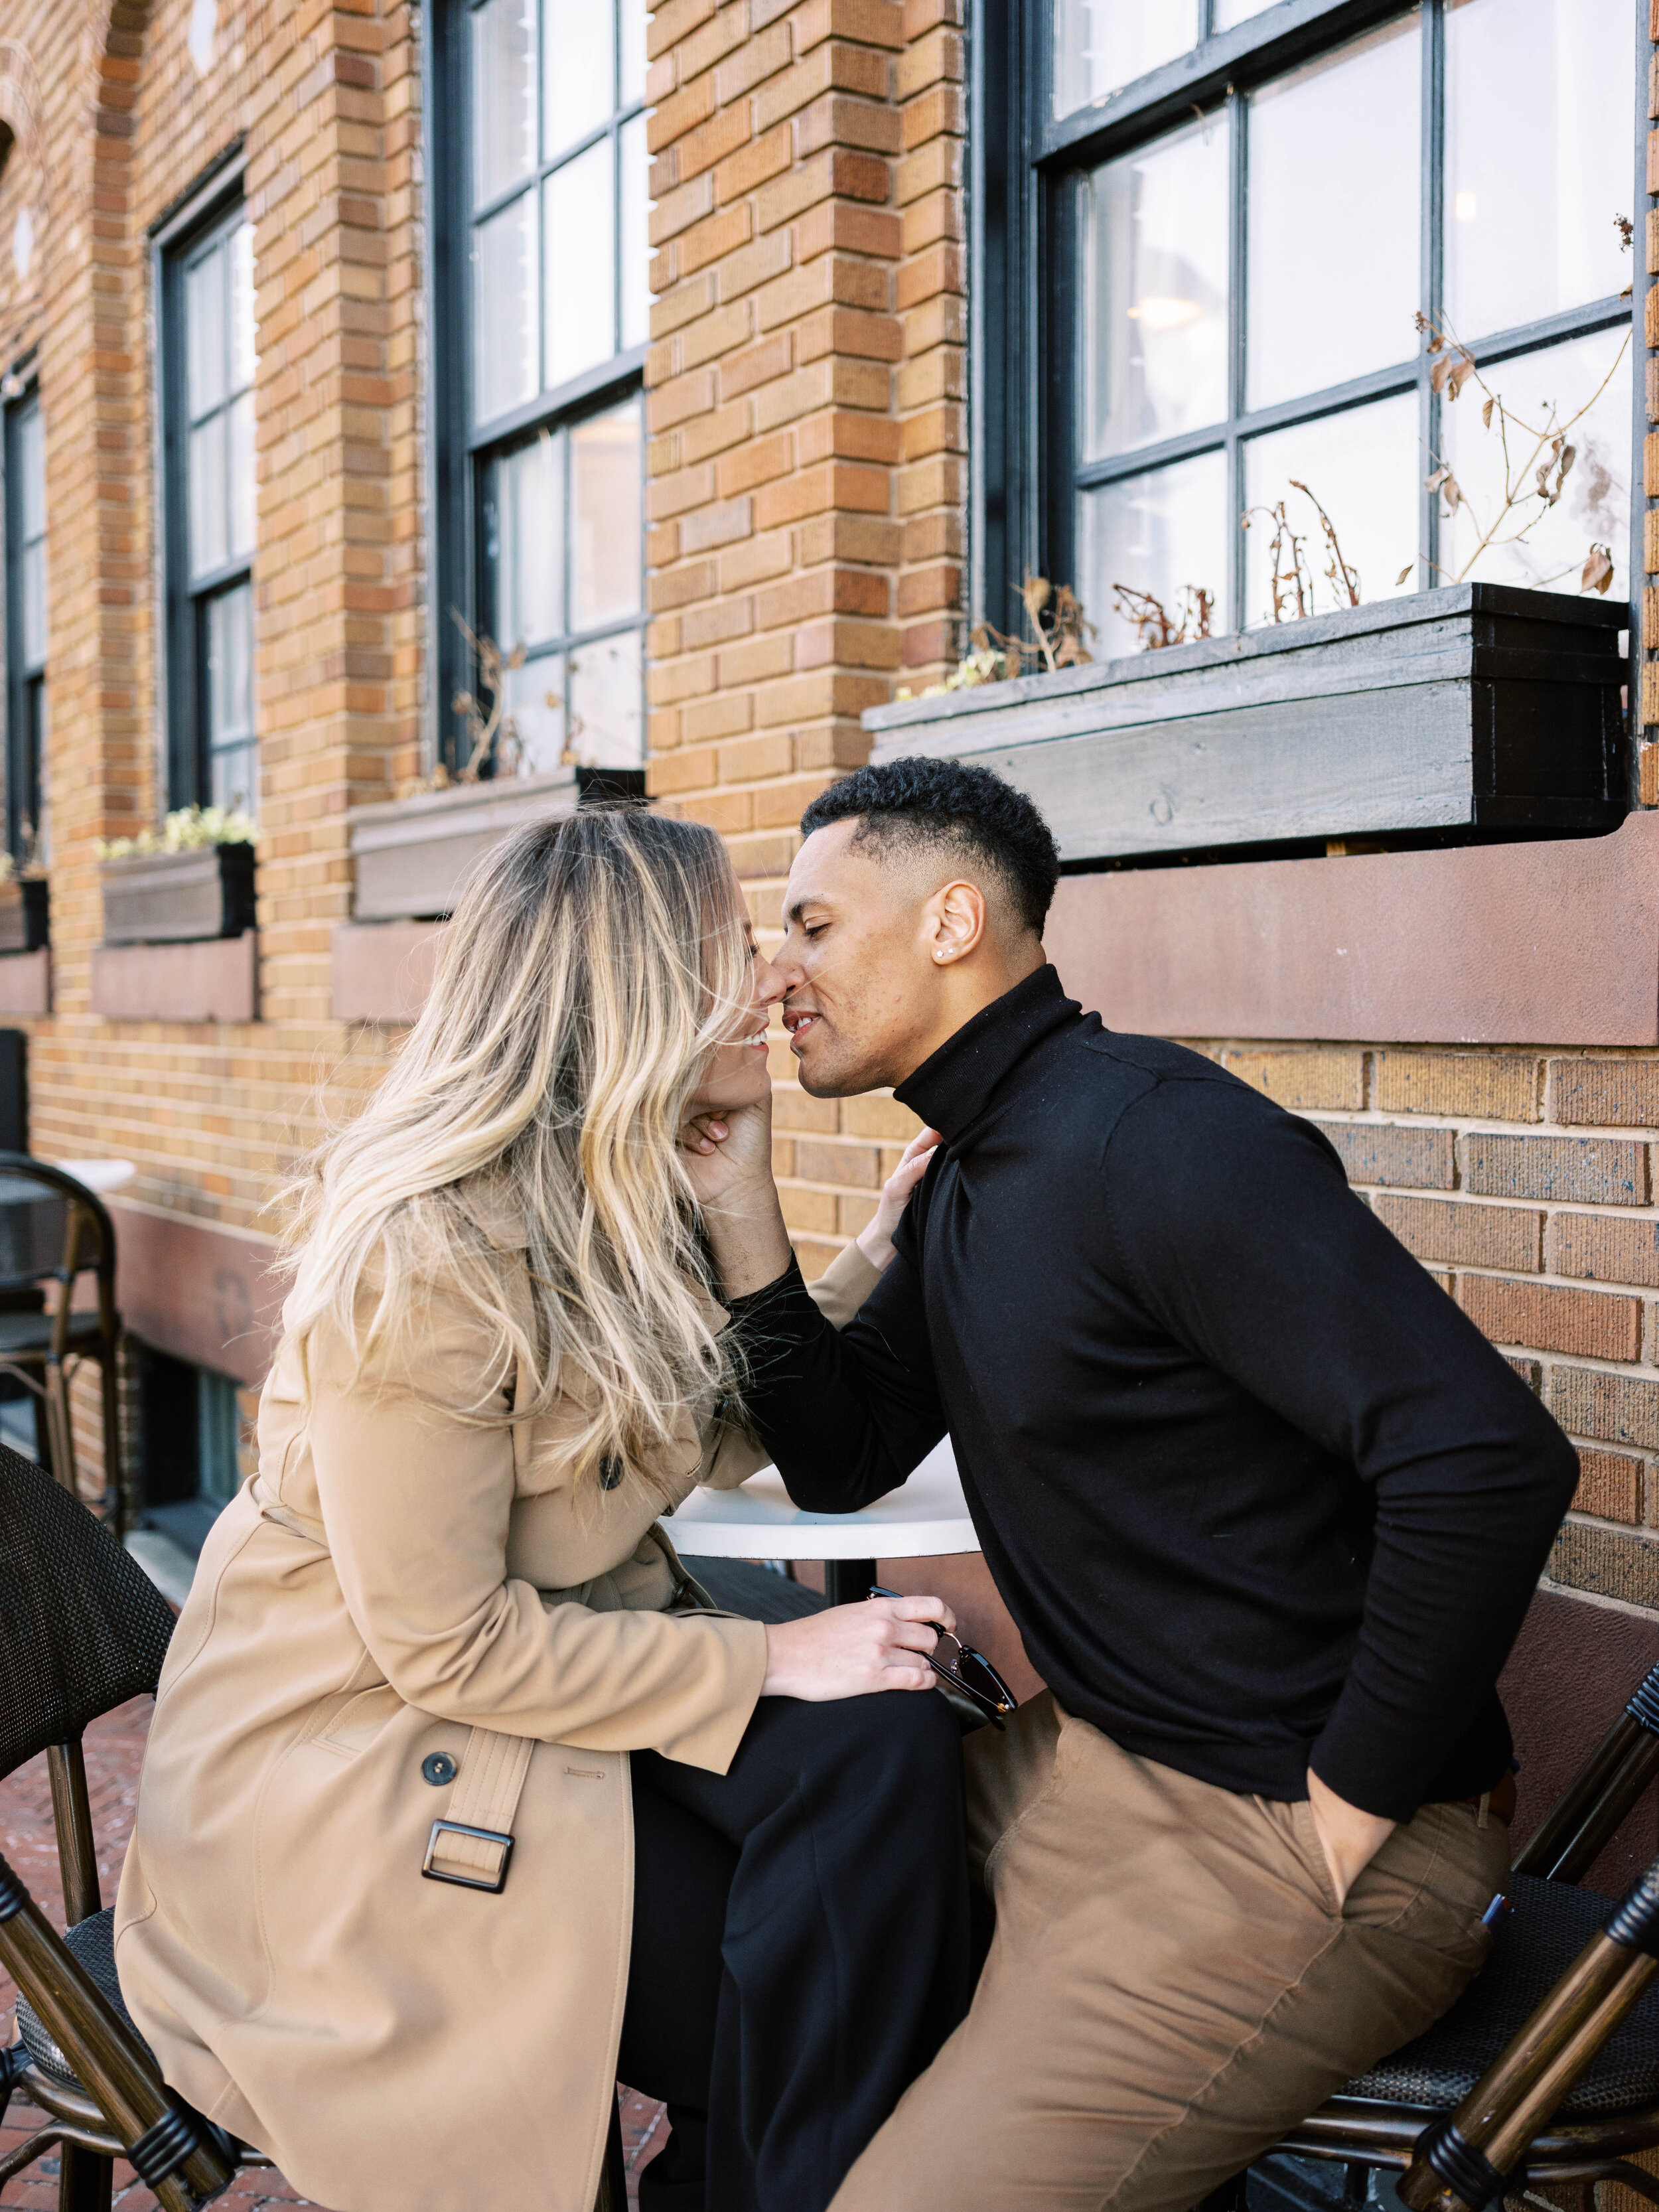 Relaxed Couples portrait session at a cafe in fells point, baltimore